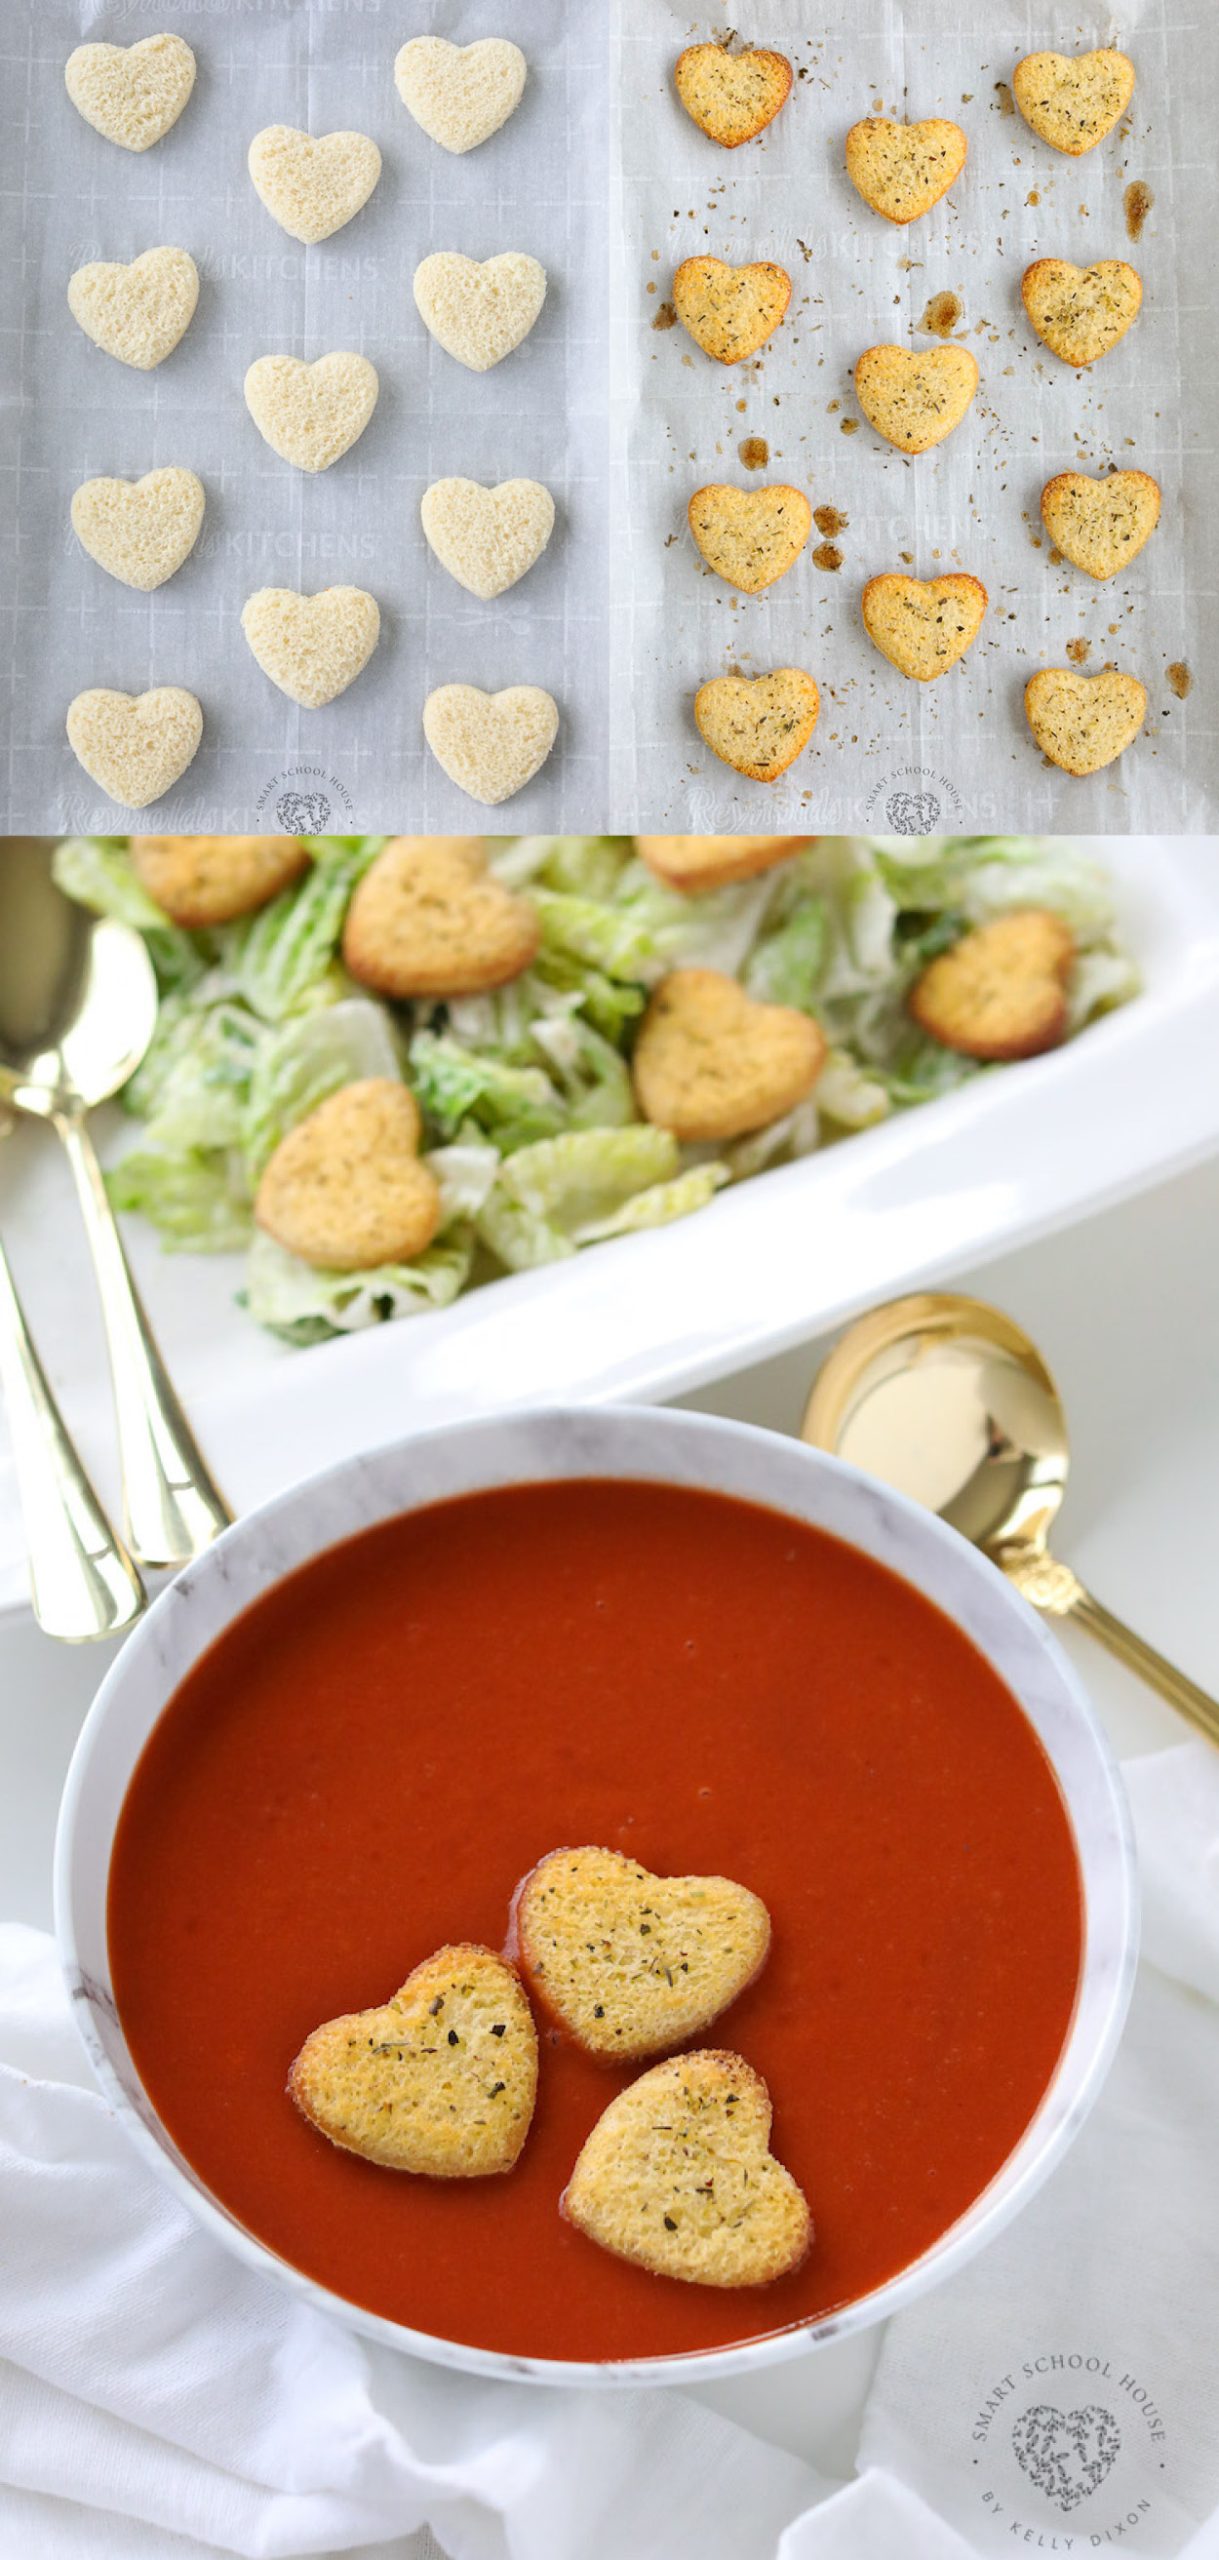 Baked, 4 ingredient Heart Croutons add so much love to your soups and salads, especially for Valentine's Day, anniversaries, or birthdays.